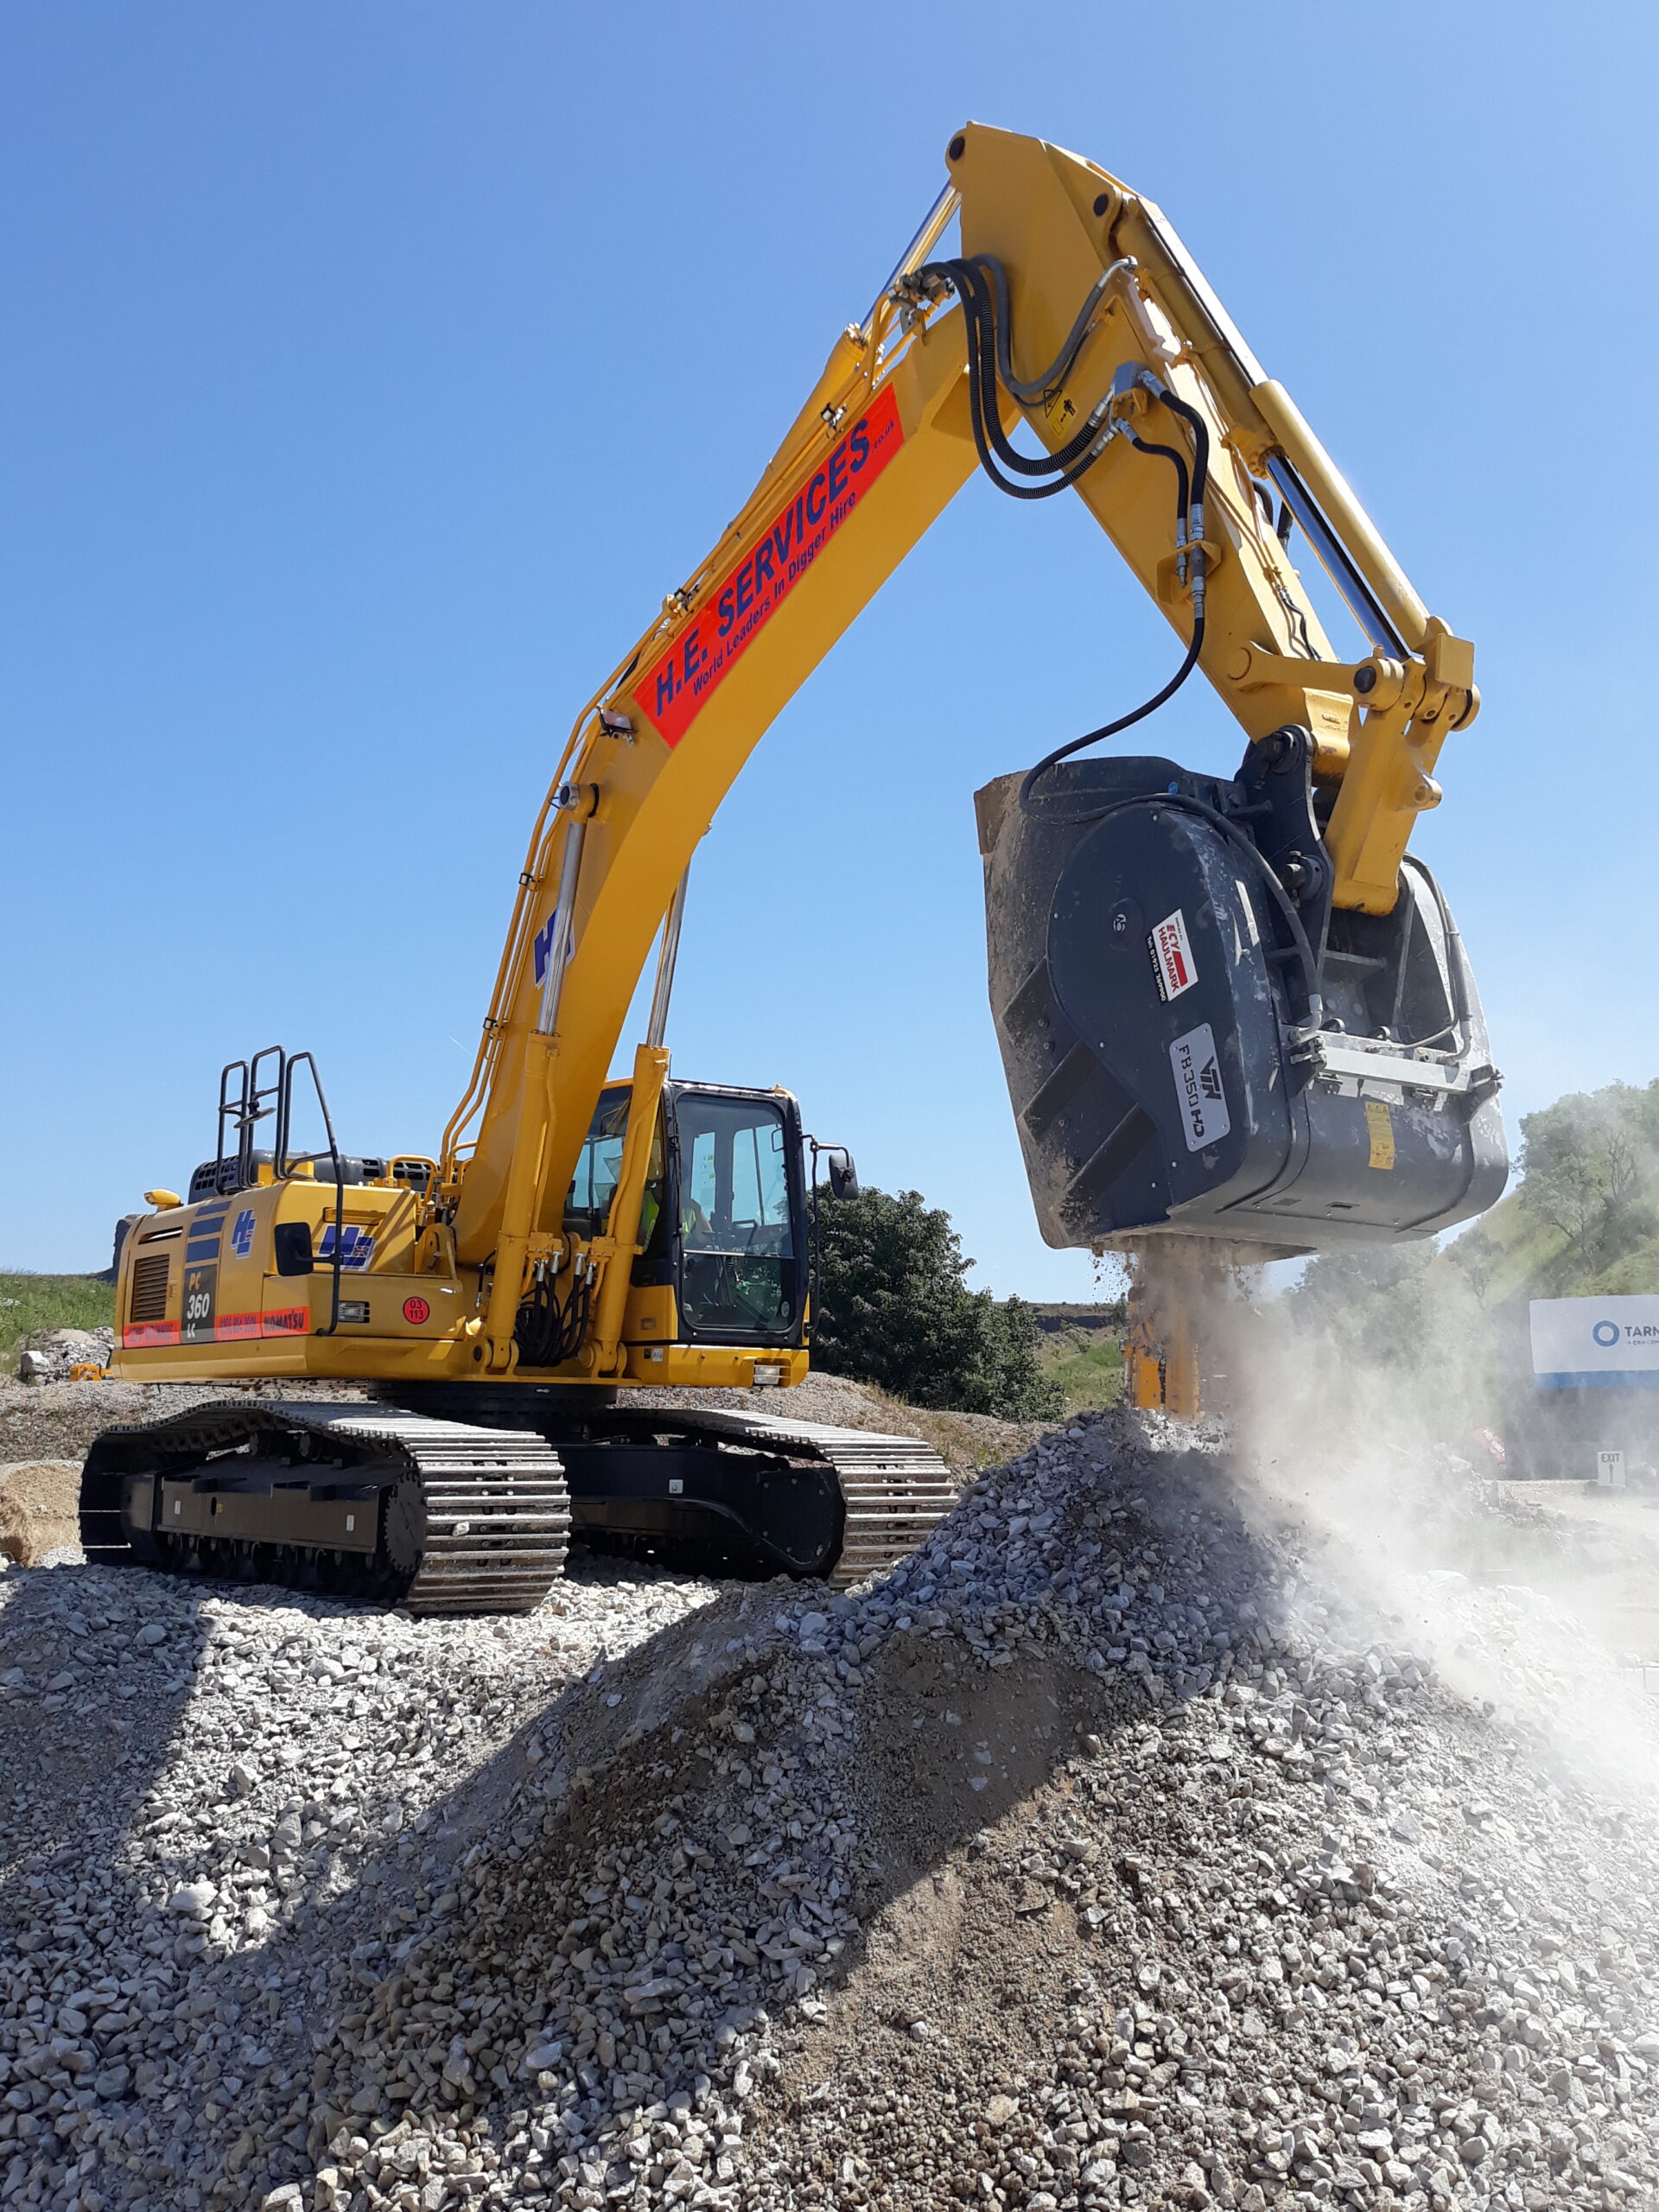 Hire our digger attachments